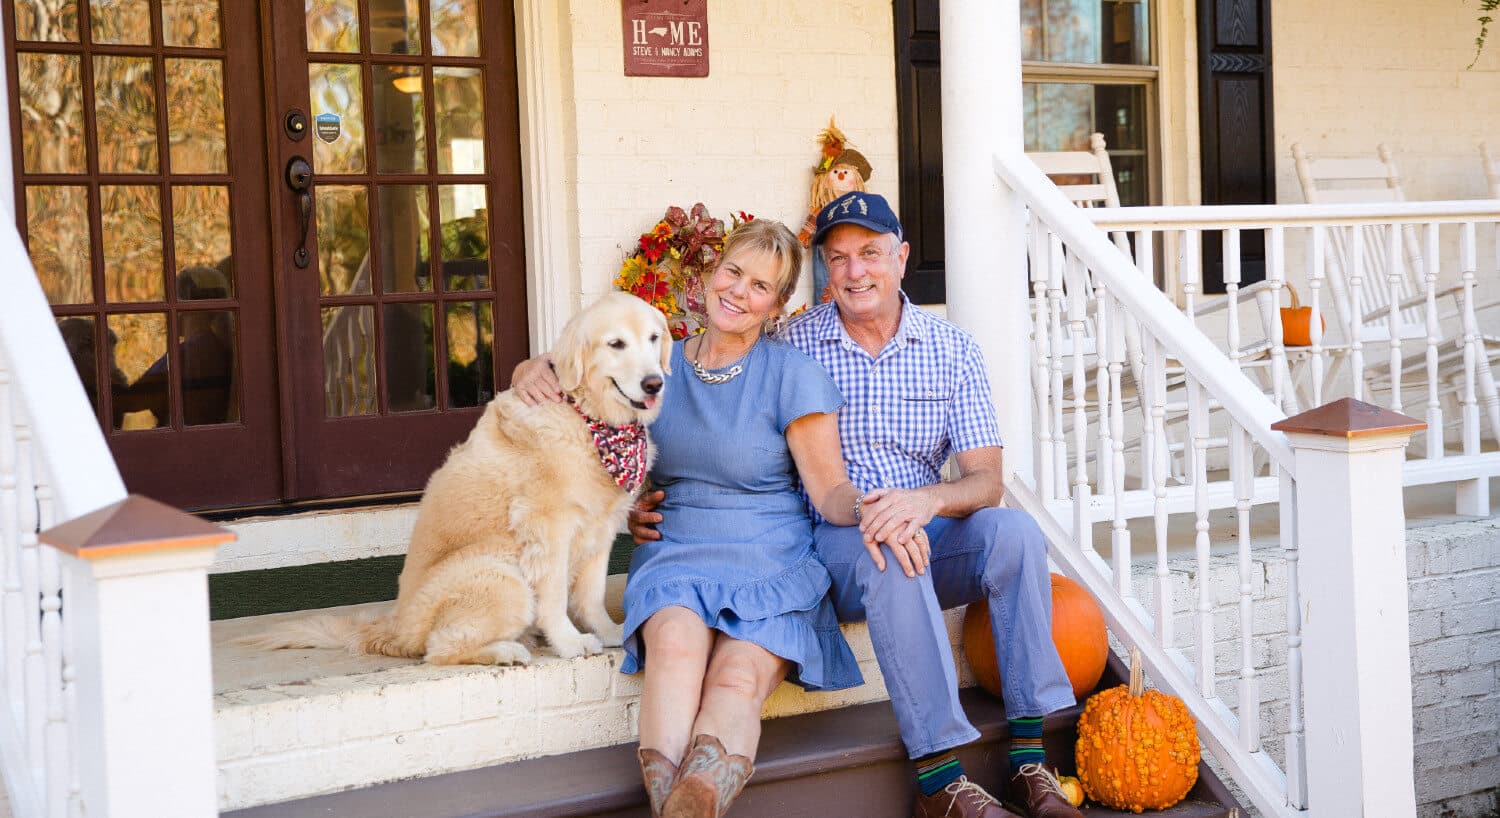 Man and woman wearing blue attire sitting on steps of inn with fall decorations and golden retriever beside.